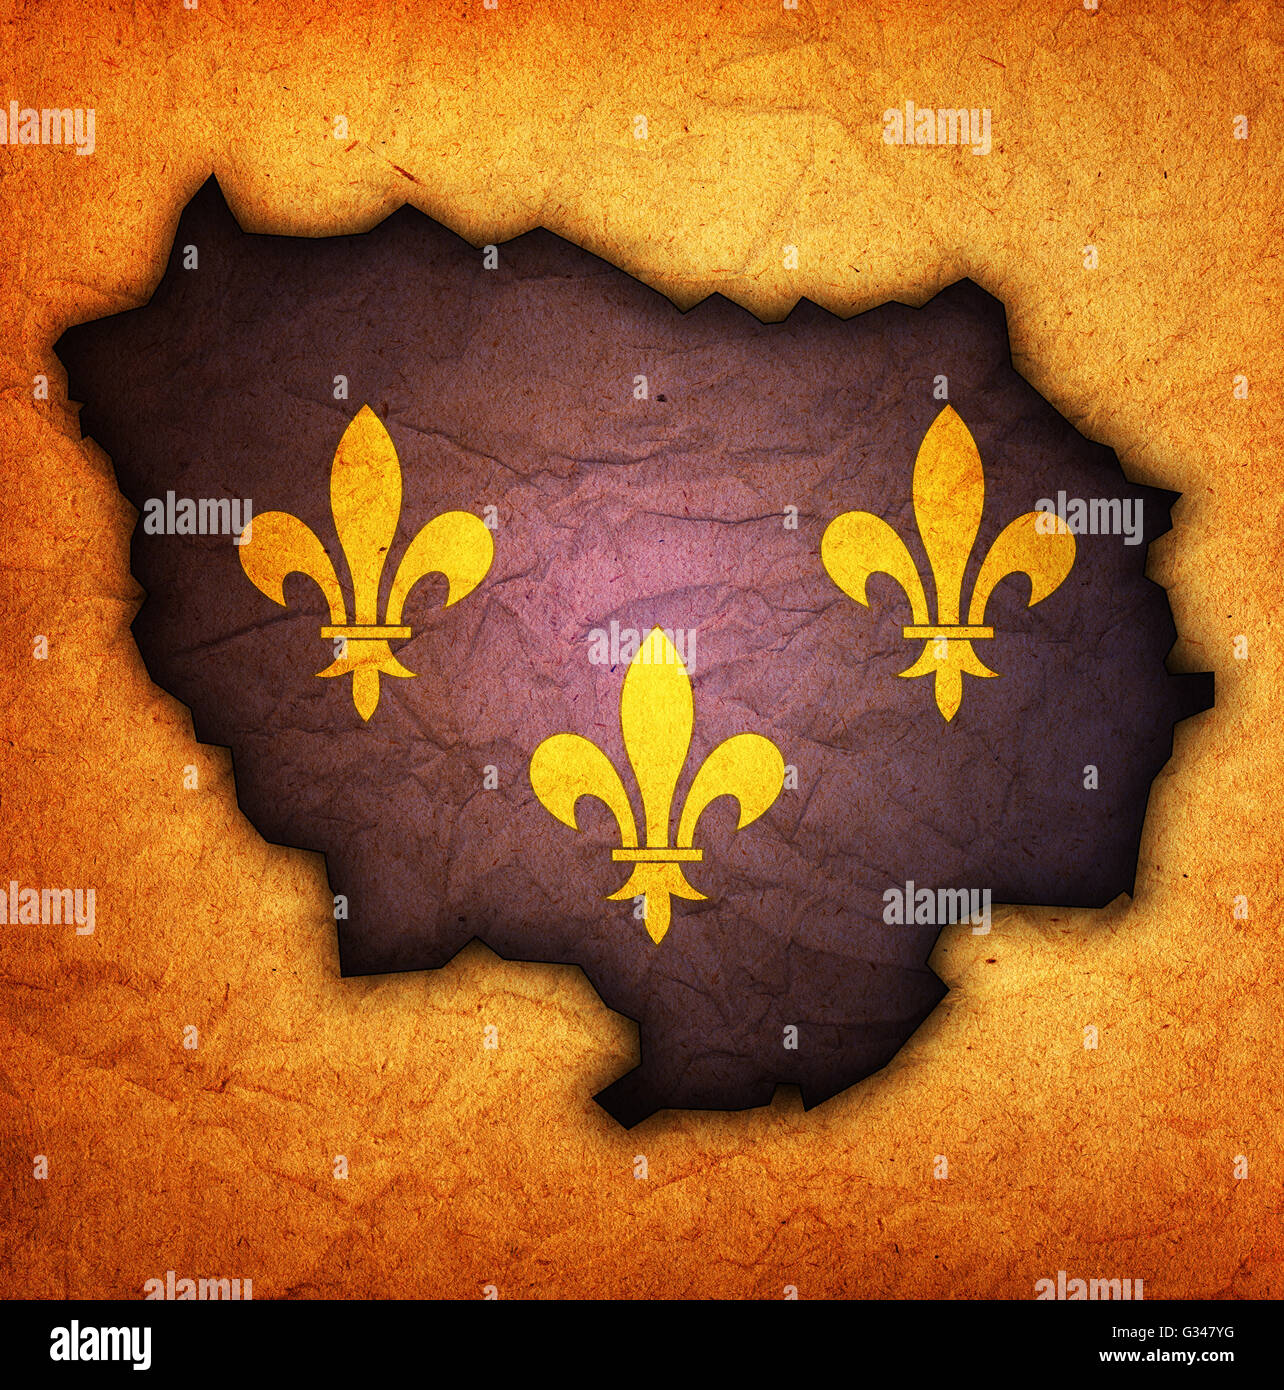 old map with flag of department, administrative region of france called ile de france Stock Photo